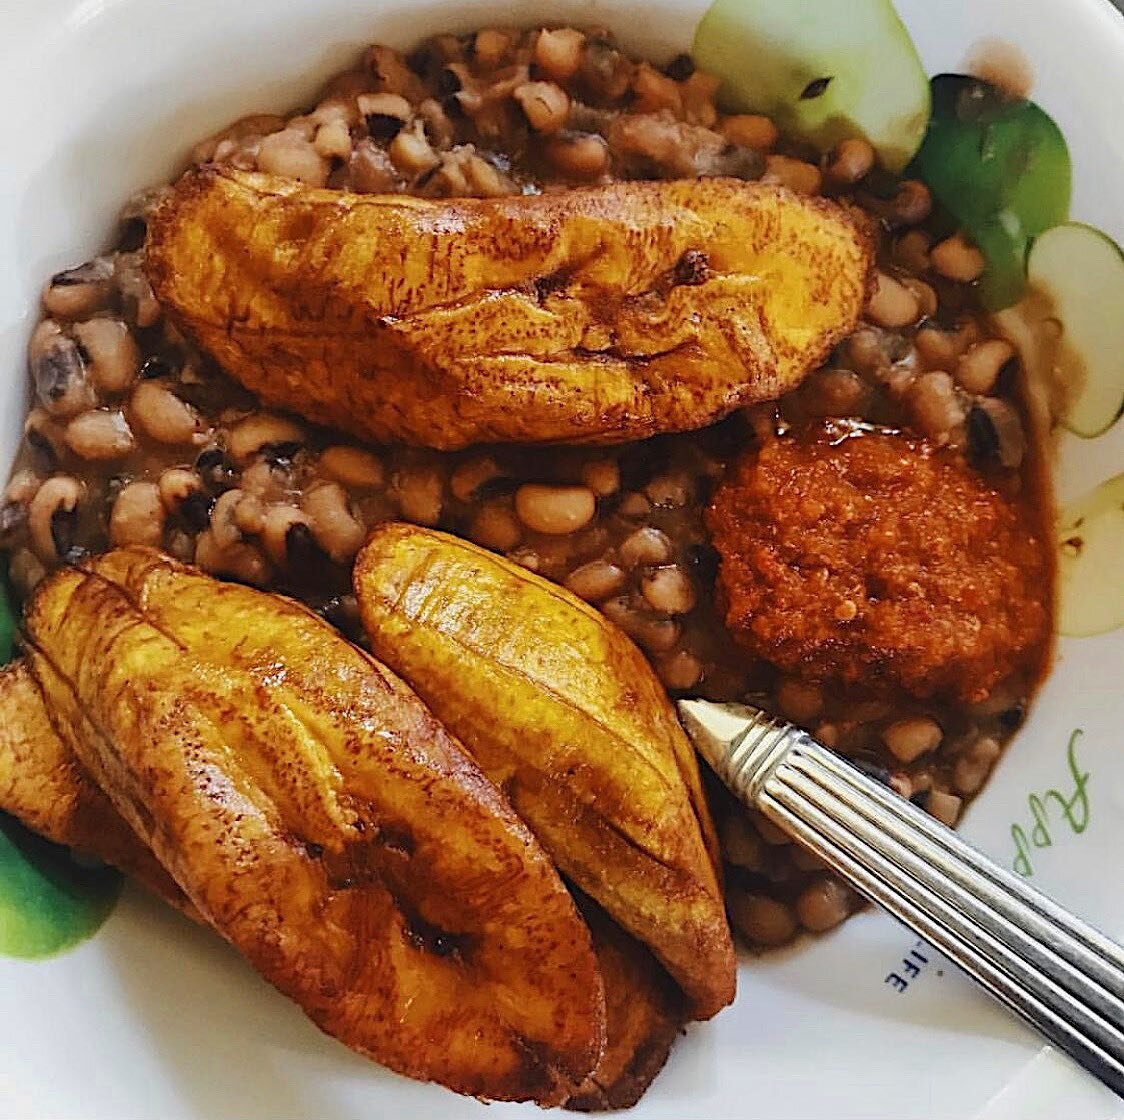 Breakfast✨

Warm, steamy, savory black eyed beans, sweet fried plantain and spicy shito makes a mighty &amp; tasty AF breakfast bowl 🥣 

🌶🍌🇬🇭